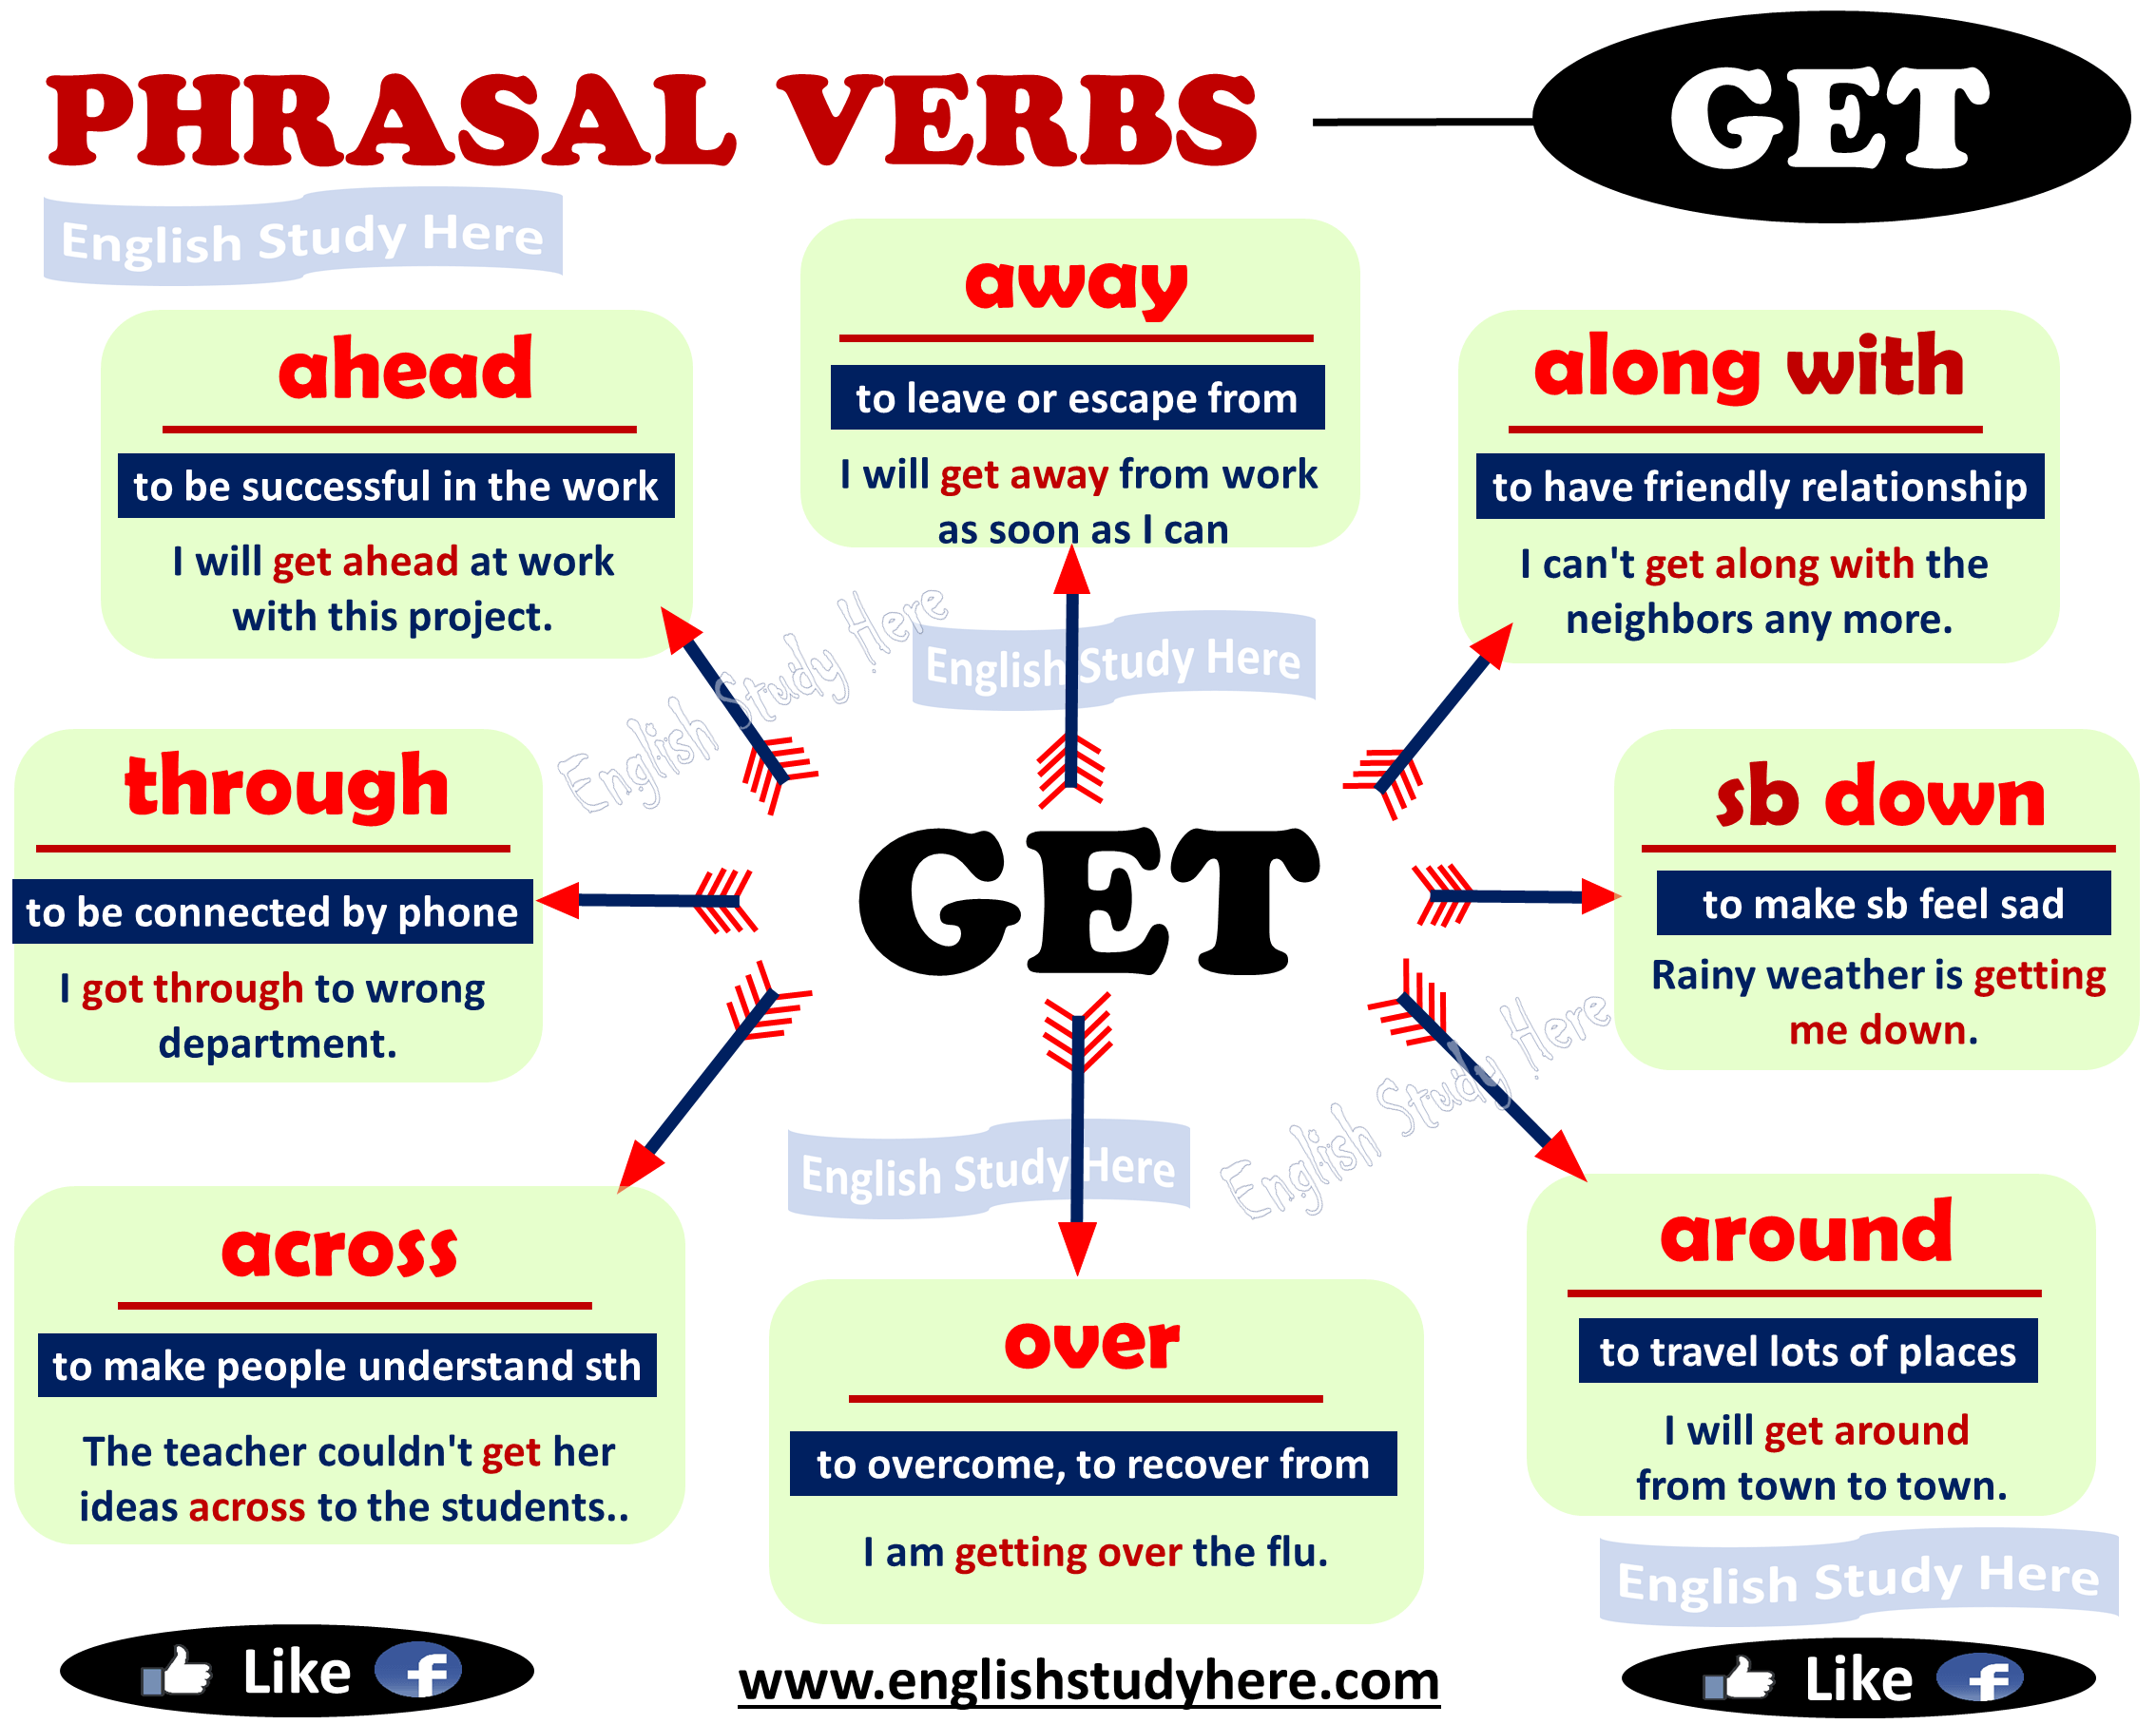 Phrasal Verbs With GET English Study Here